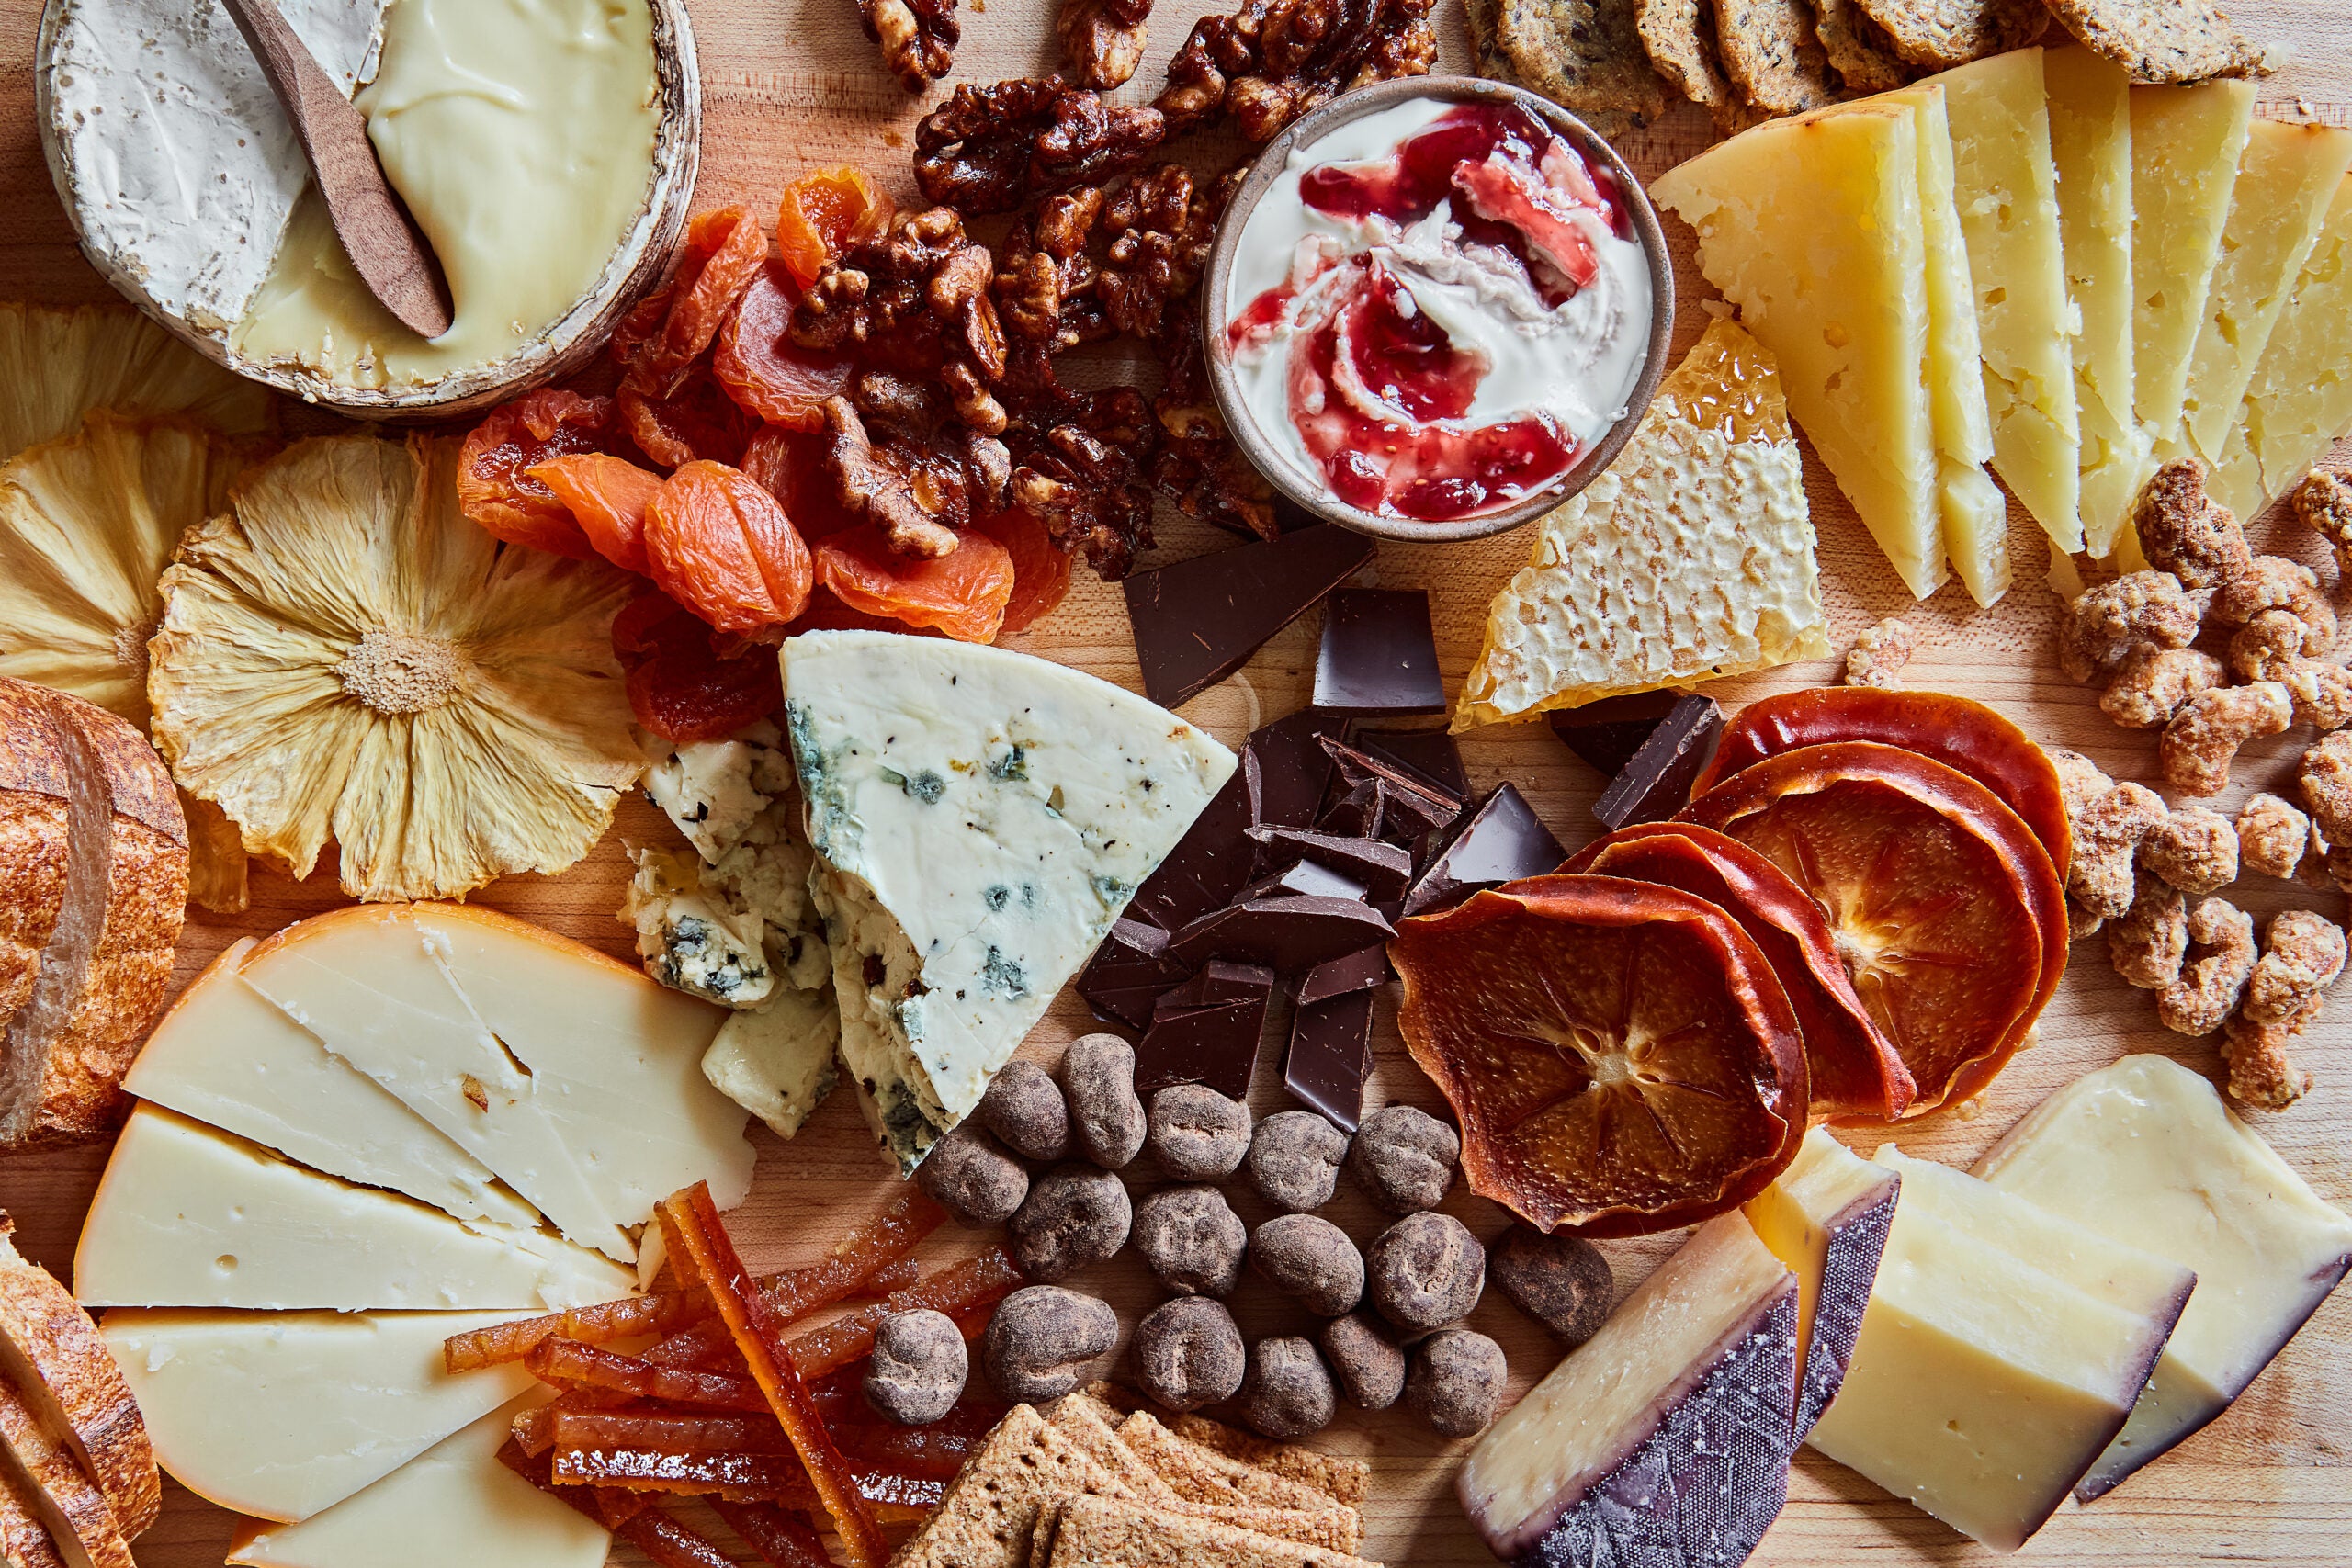 Wisconsin Cheese Boards Feature